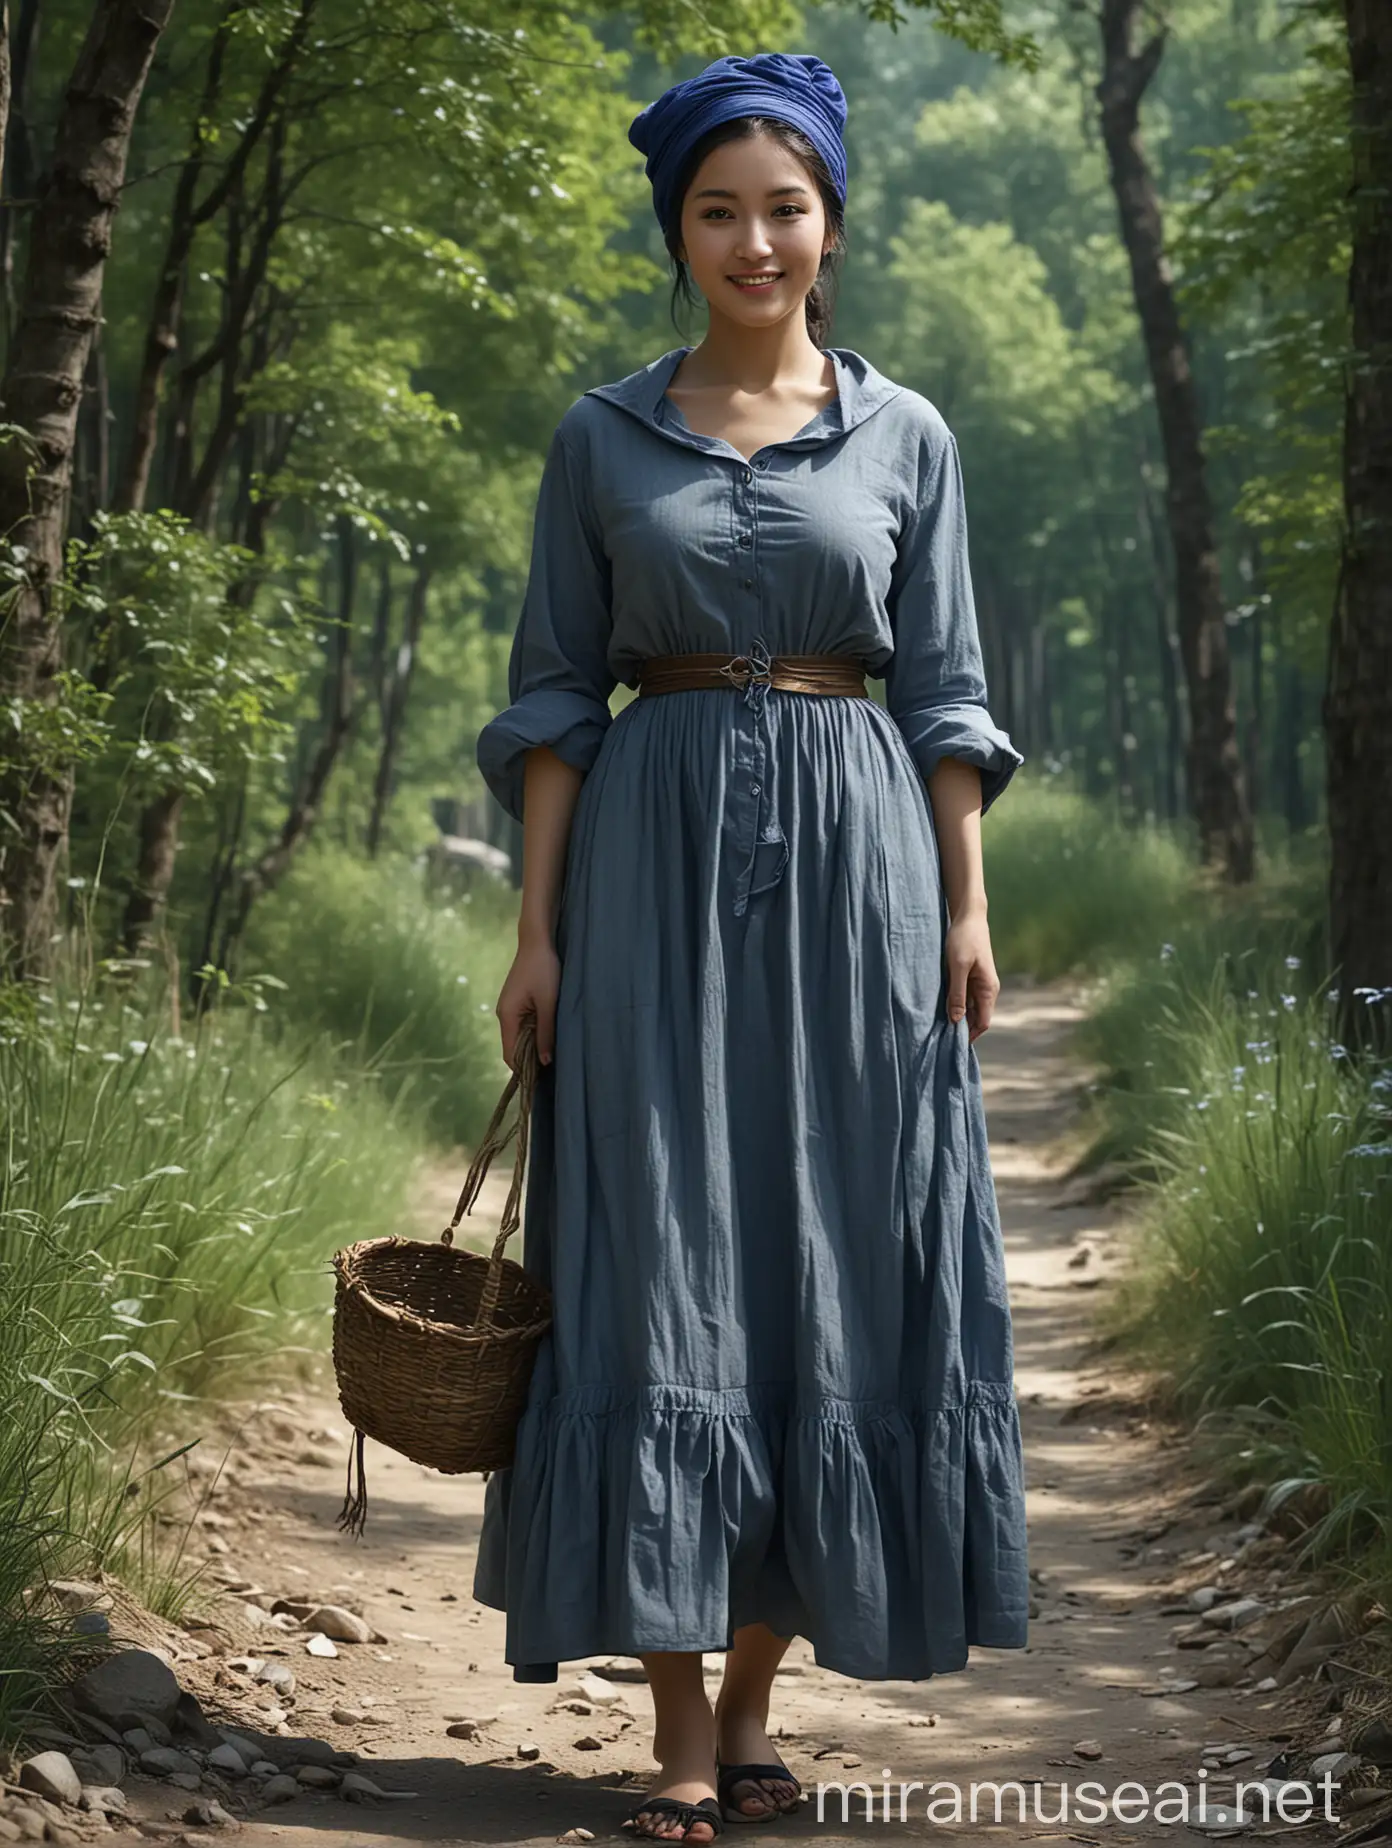 Rustic Country Woman Working on Mountain Path with Hoe